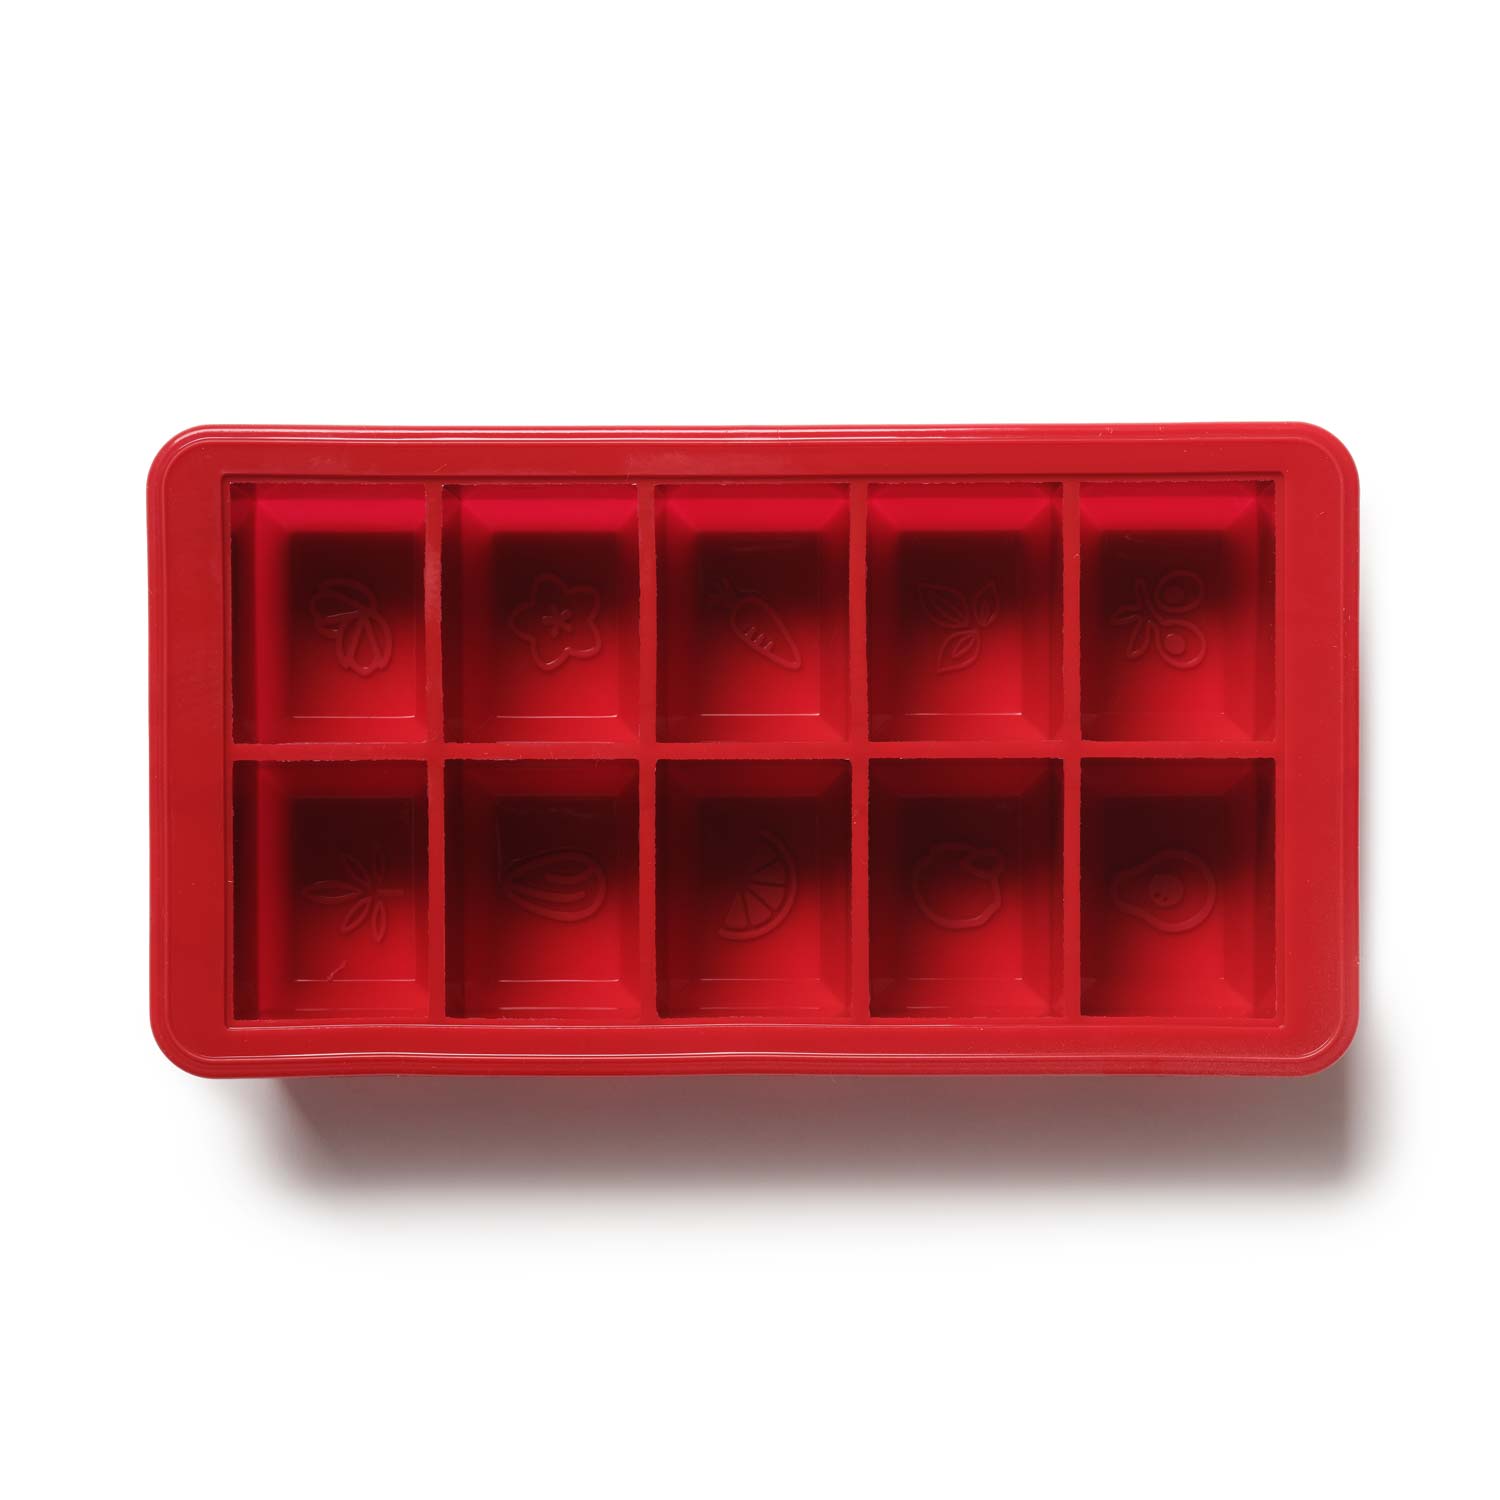 LEVO oil herb block tray in Red without cap